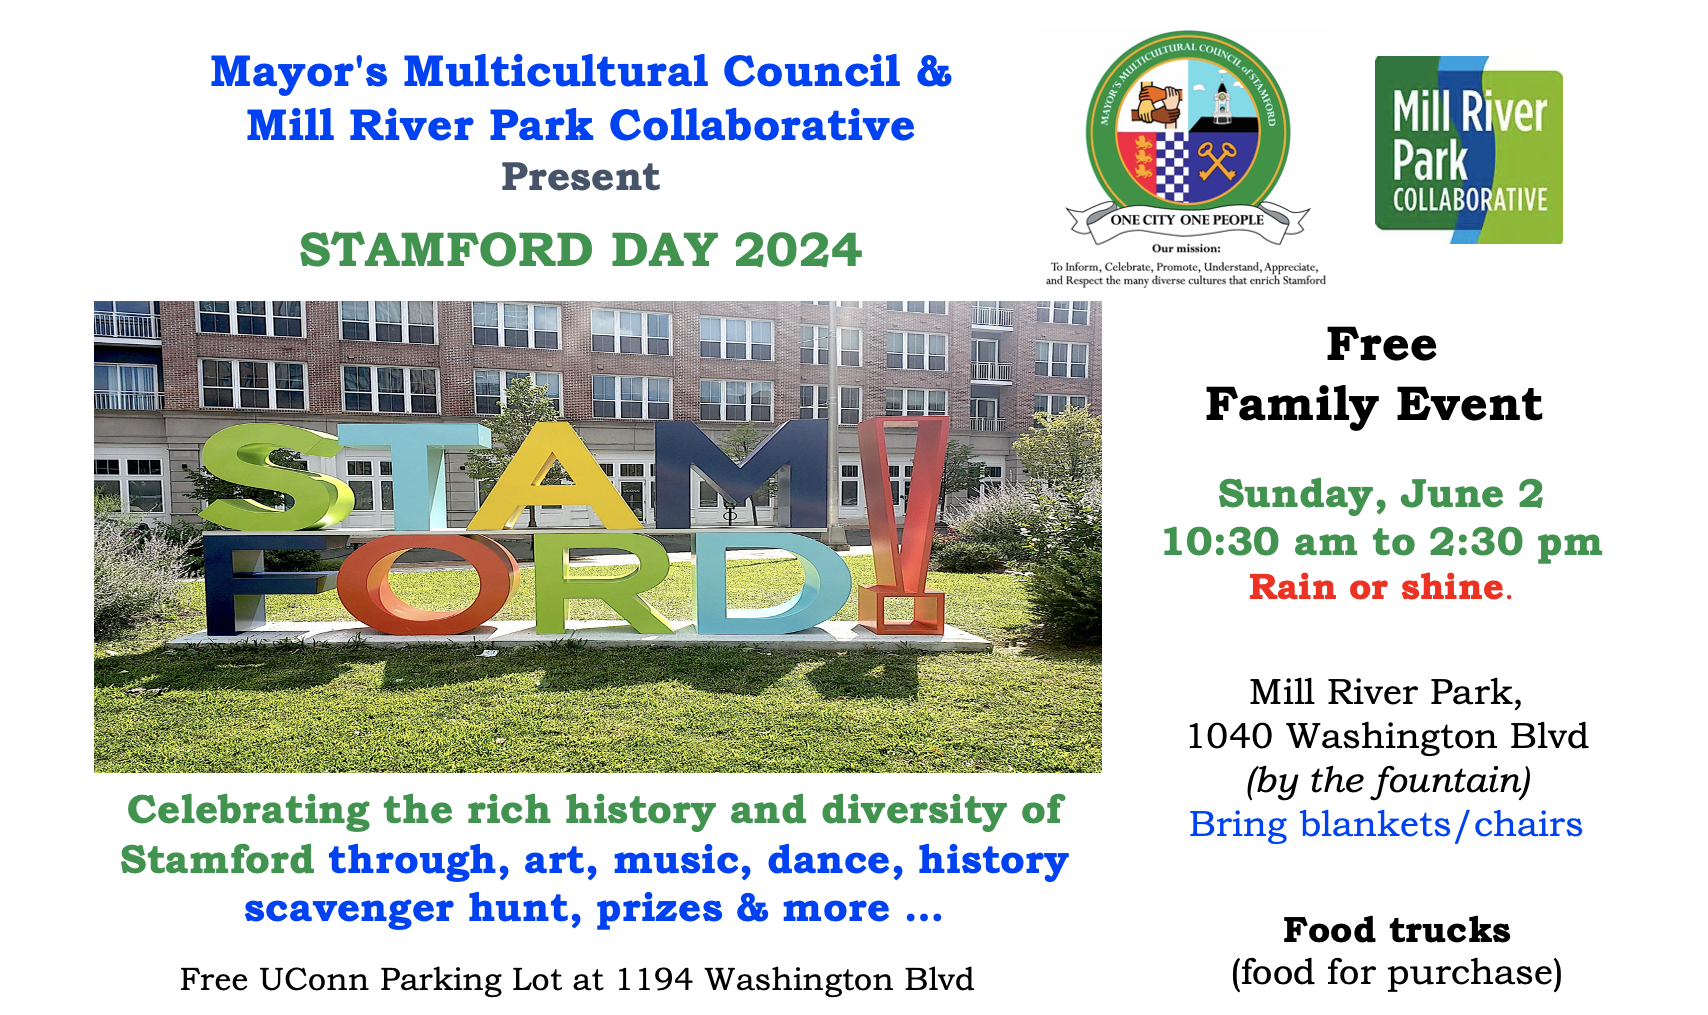 MMC Stamford Day 2024 Mill River Park June 2 from 10:30 AM  to 2:30 PM Celebrating the rich history and diversity of Stamford thought art, music, dance, history, fun and more...